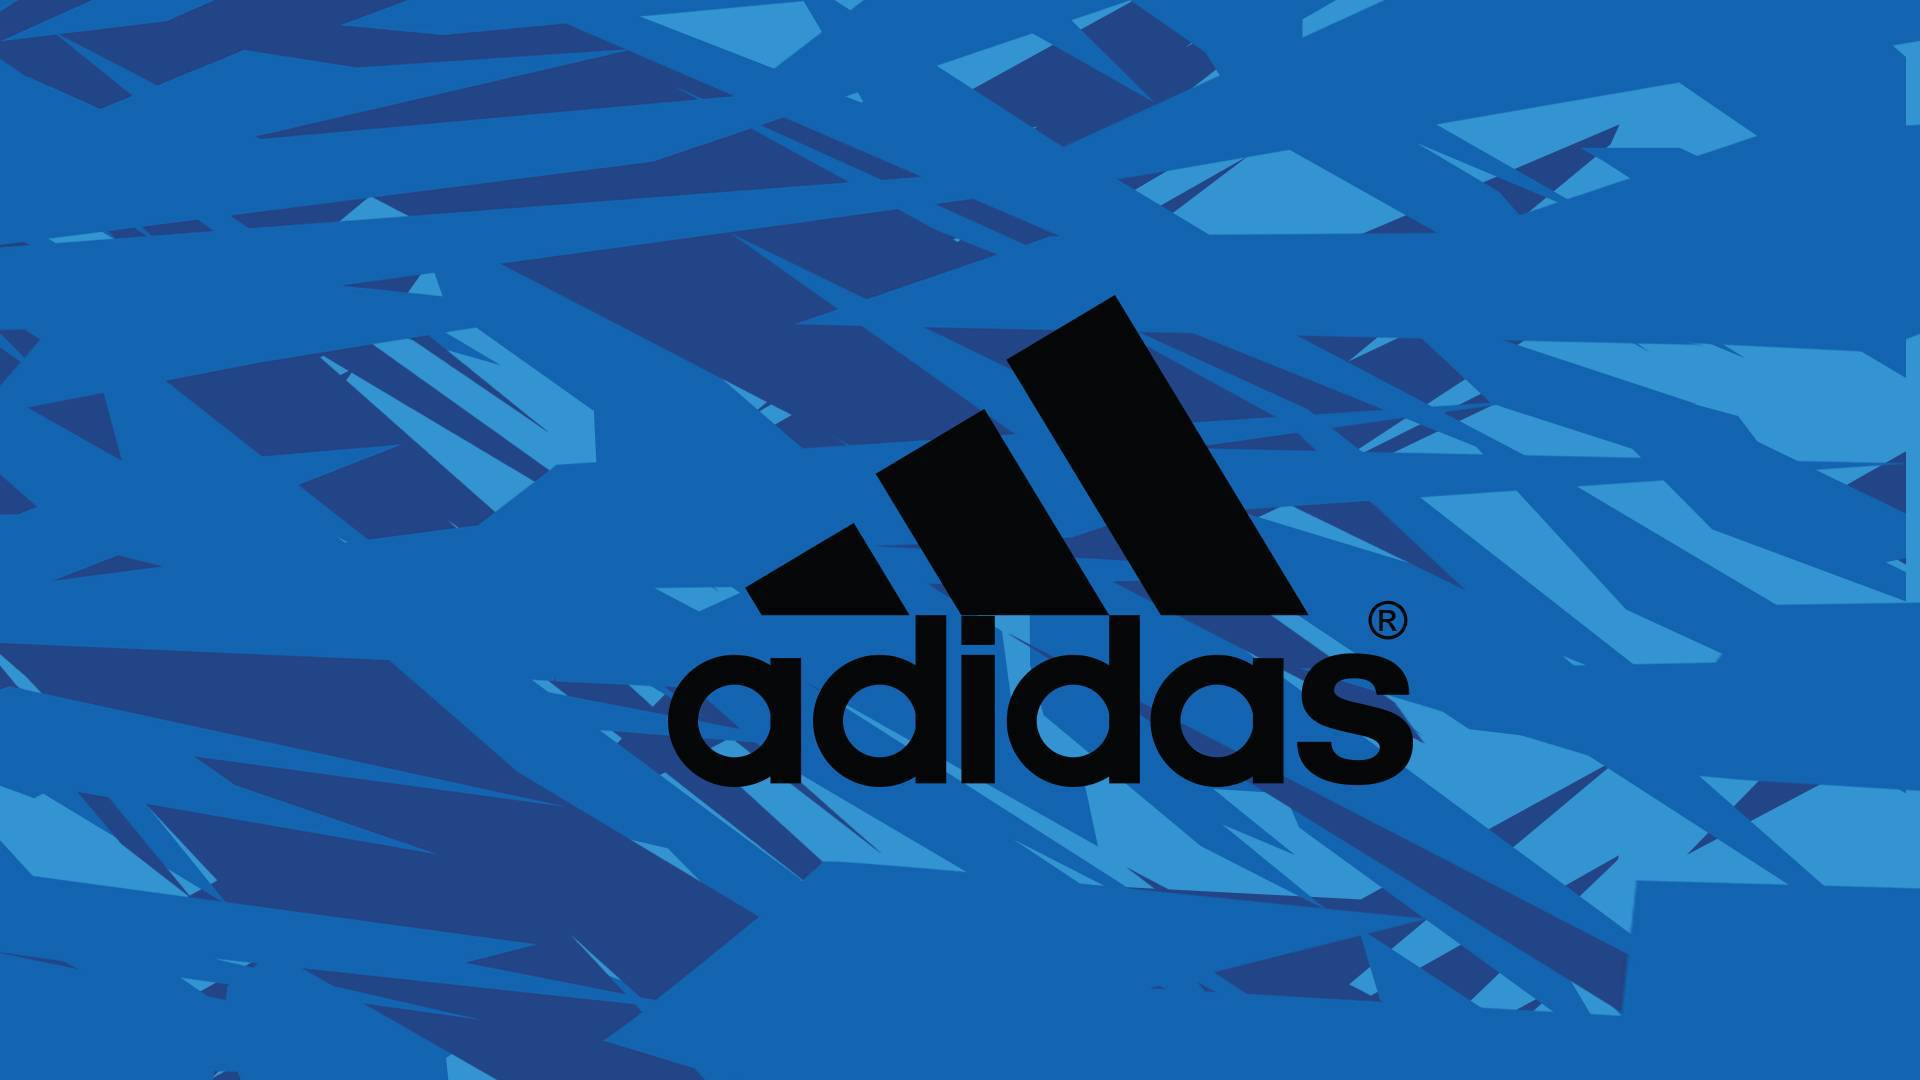 Adidas Wallpapers Images Photos Pictures Backgrounds